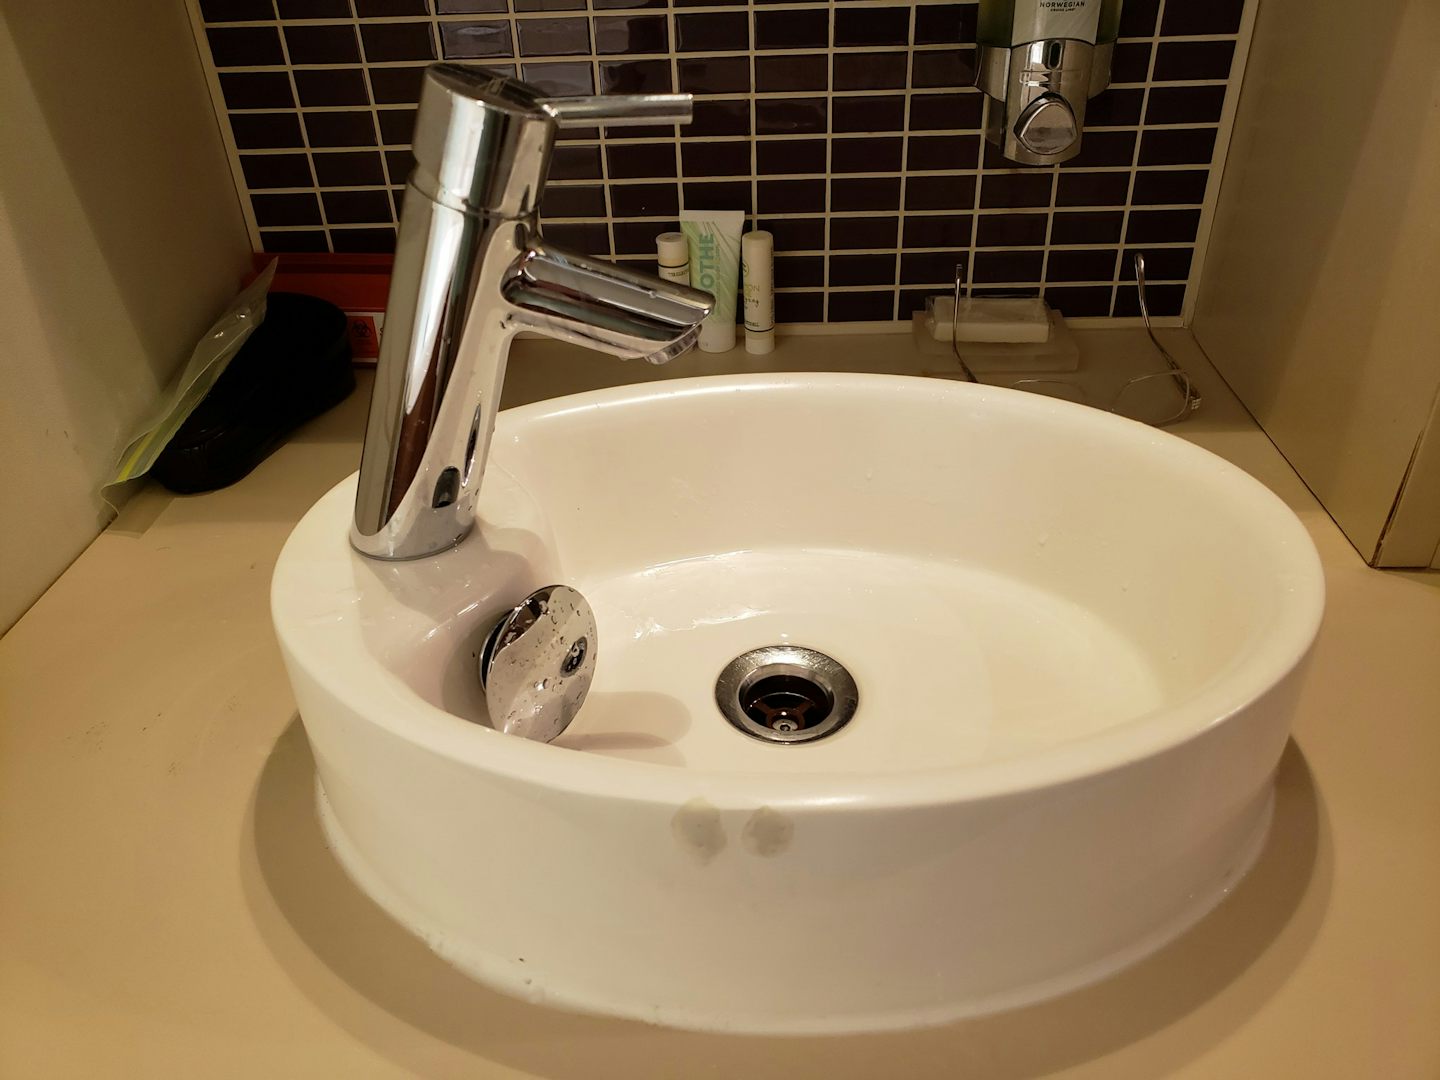 This sink is so small and the faucet takes up 1/3 of the width. No way to a